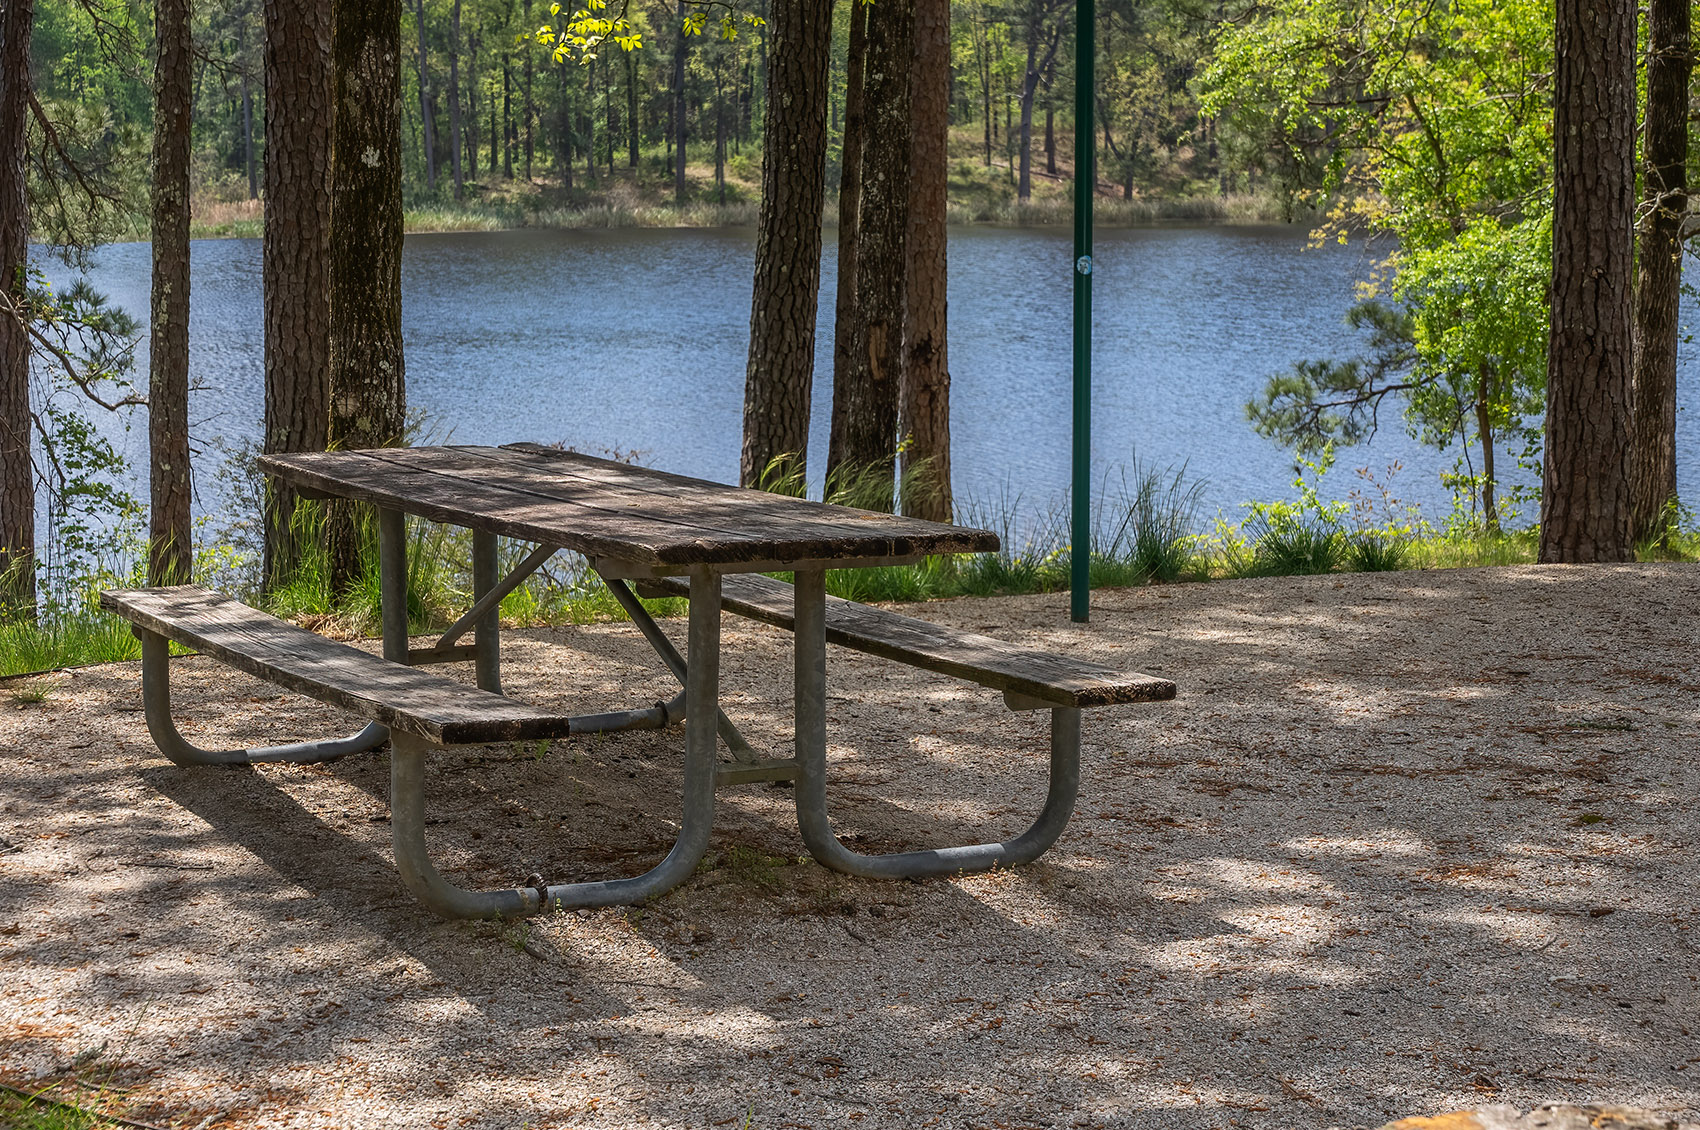 picnic table under shade of pine trees overlooking Valentine lake